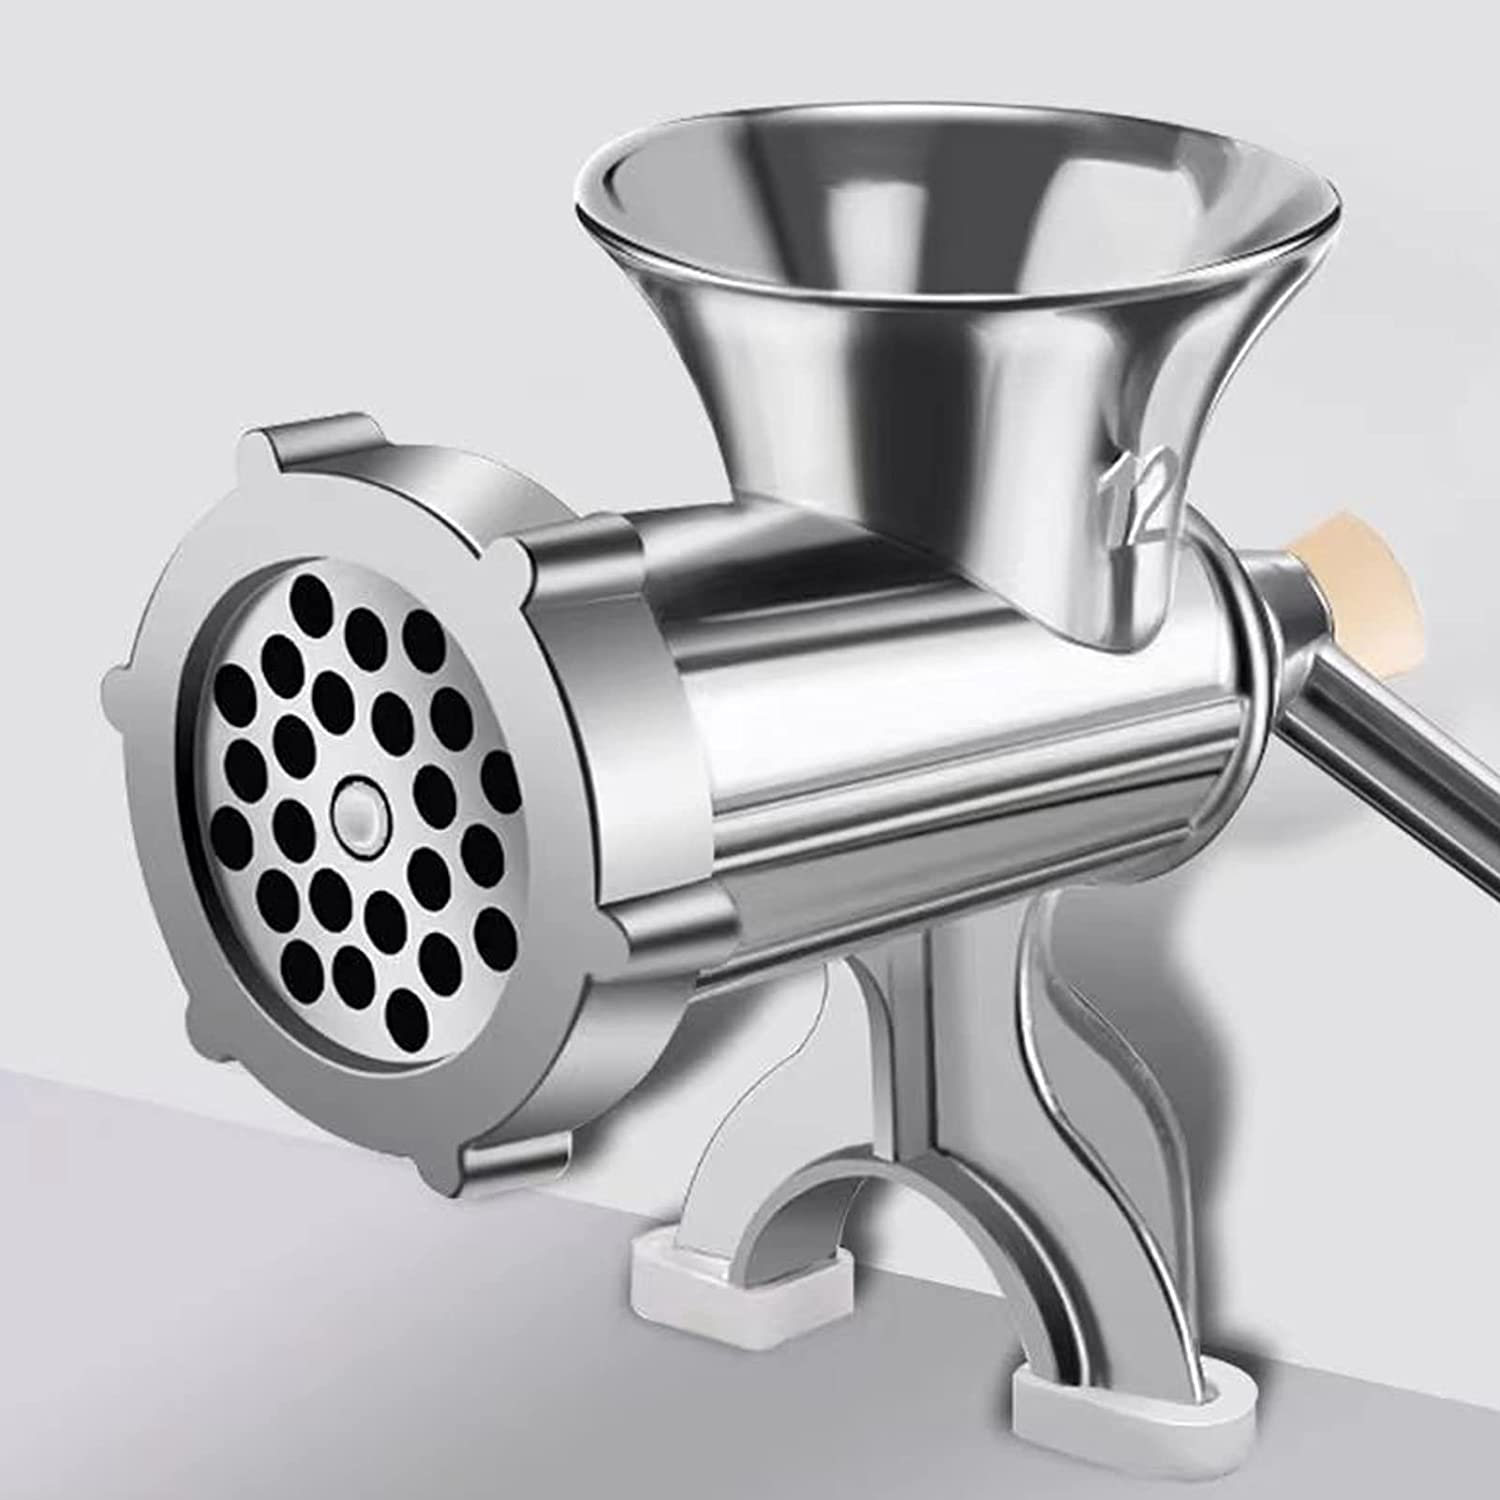 Manual Meat Mincer Sausage Filler Stainless Steel Aluminium Alloy Household Meat Grinder Multifunctional Food Processor Kit